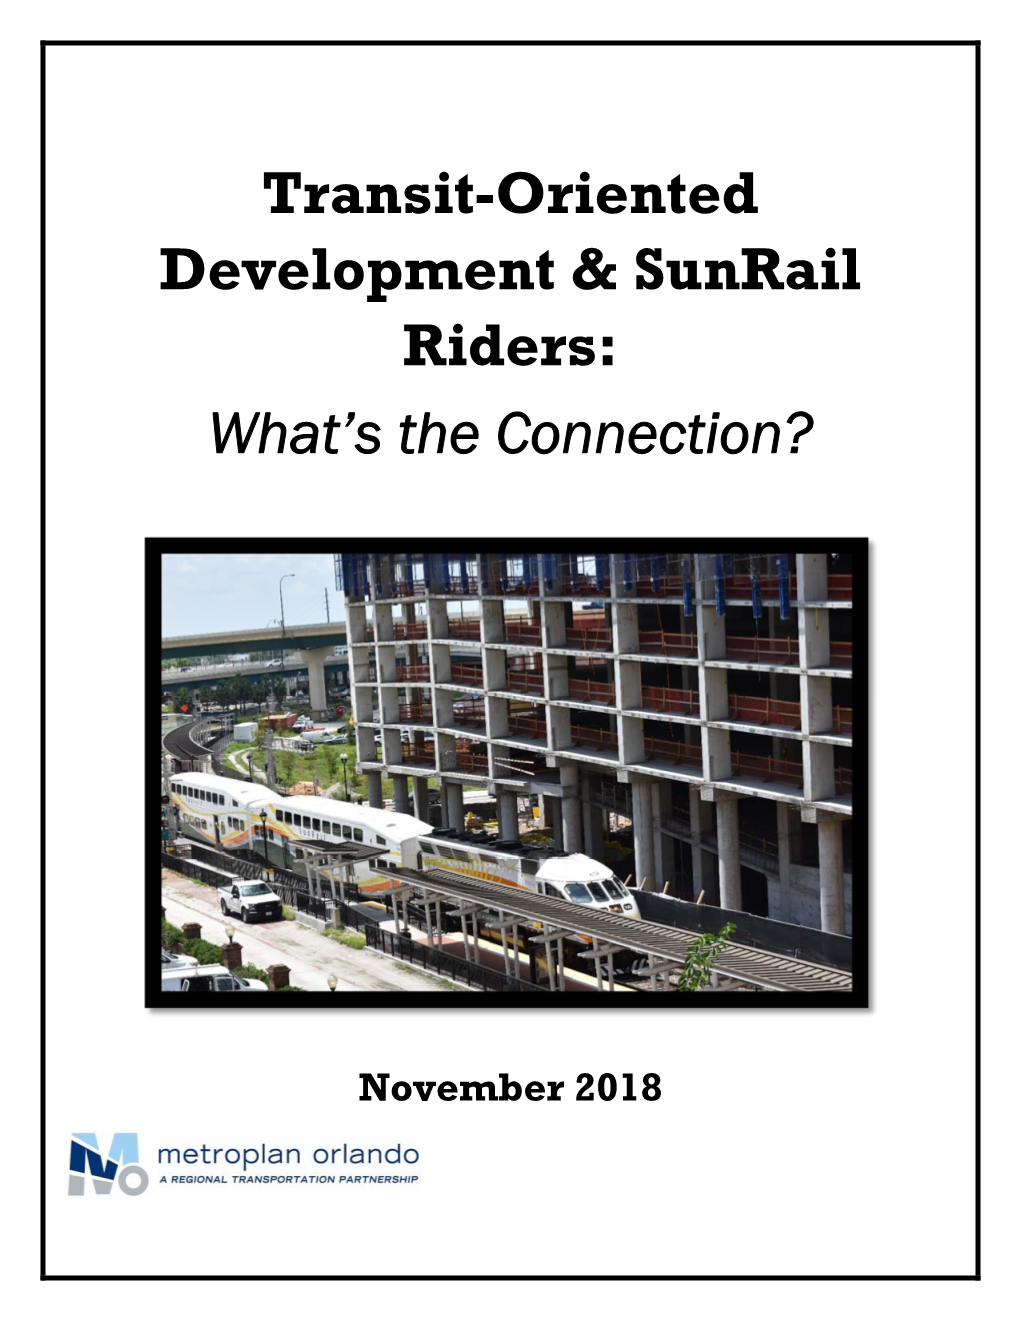 Transit-Oriented Development & Sunrail Riders: What's the Connection?